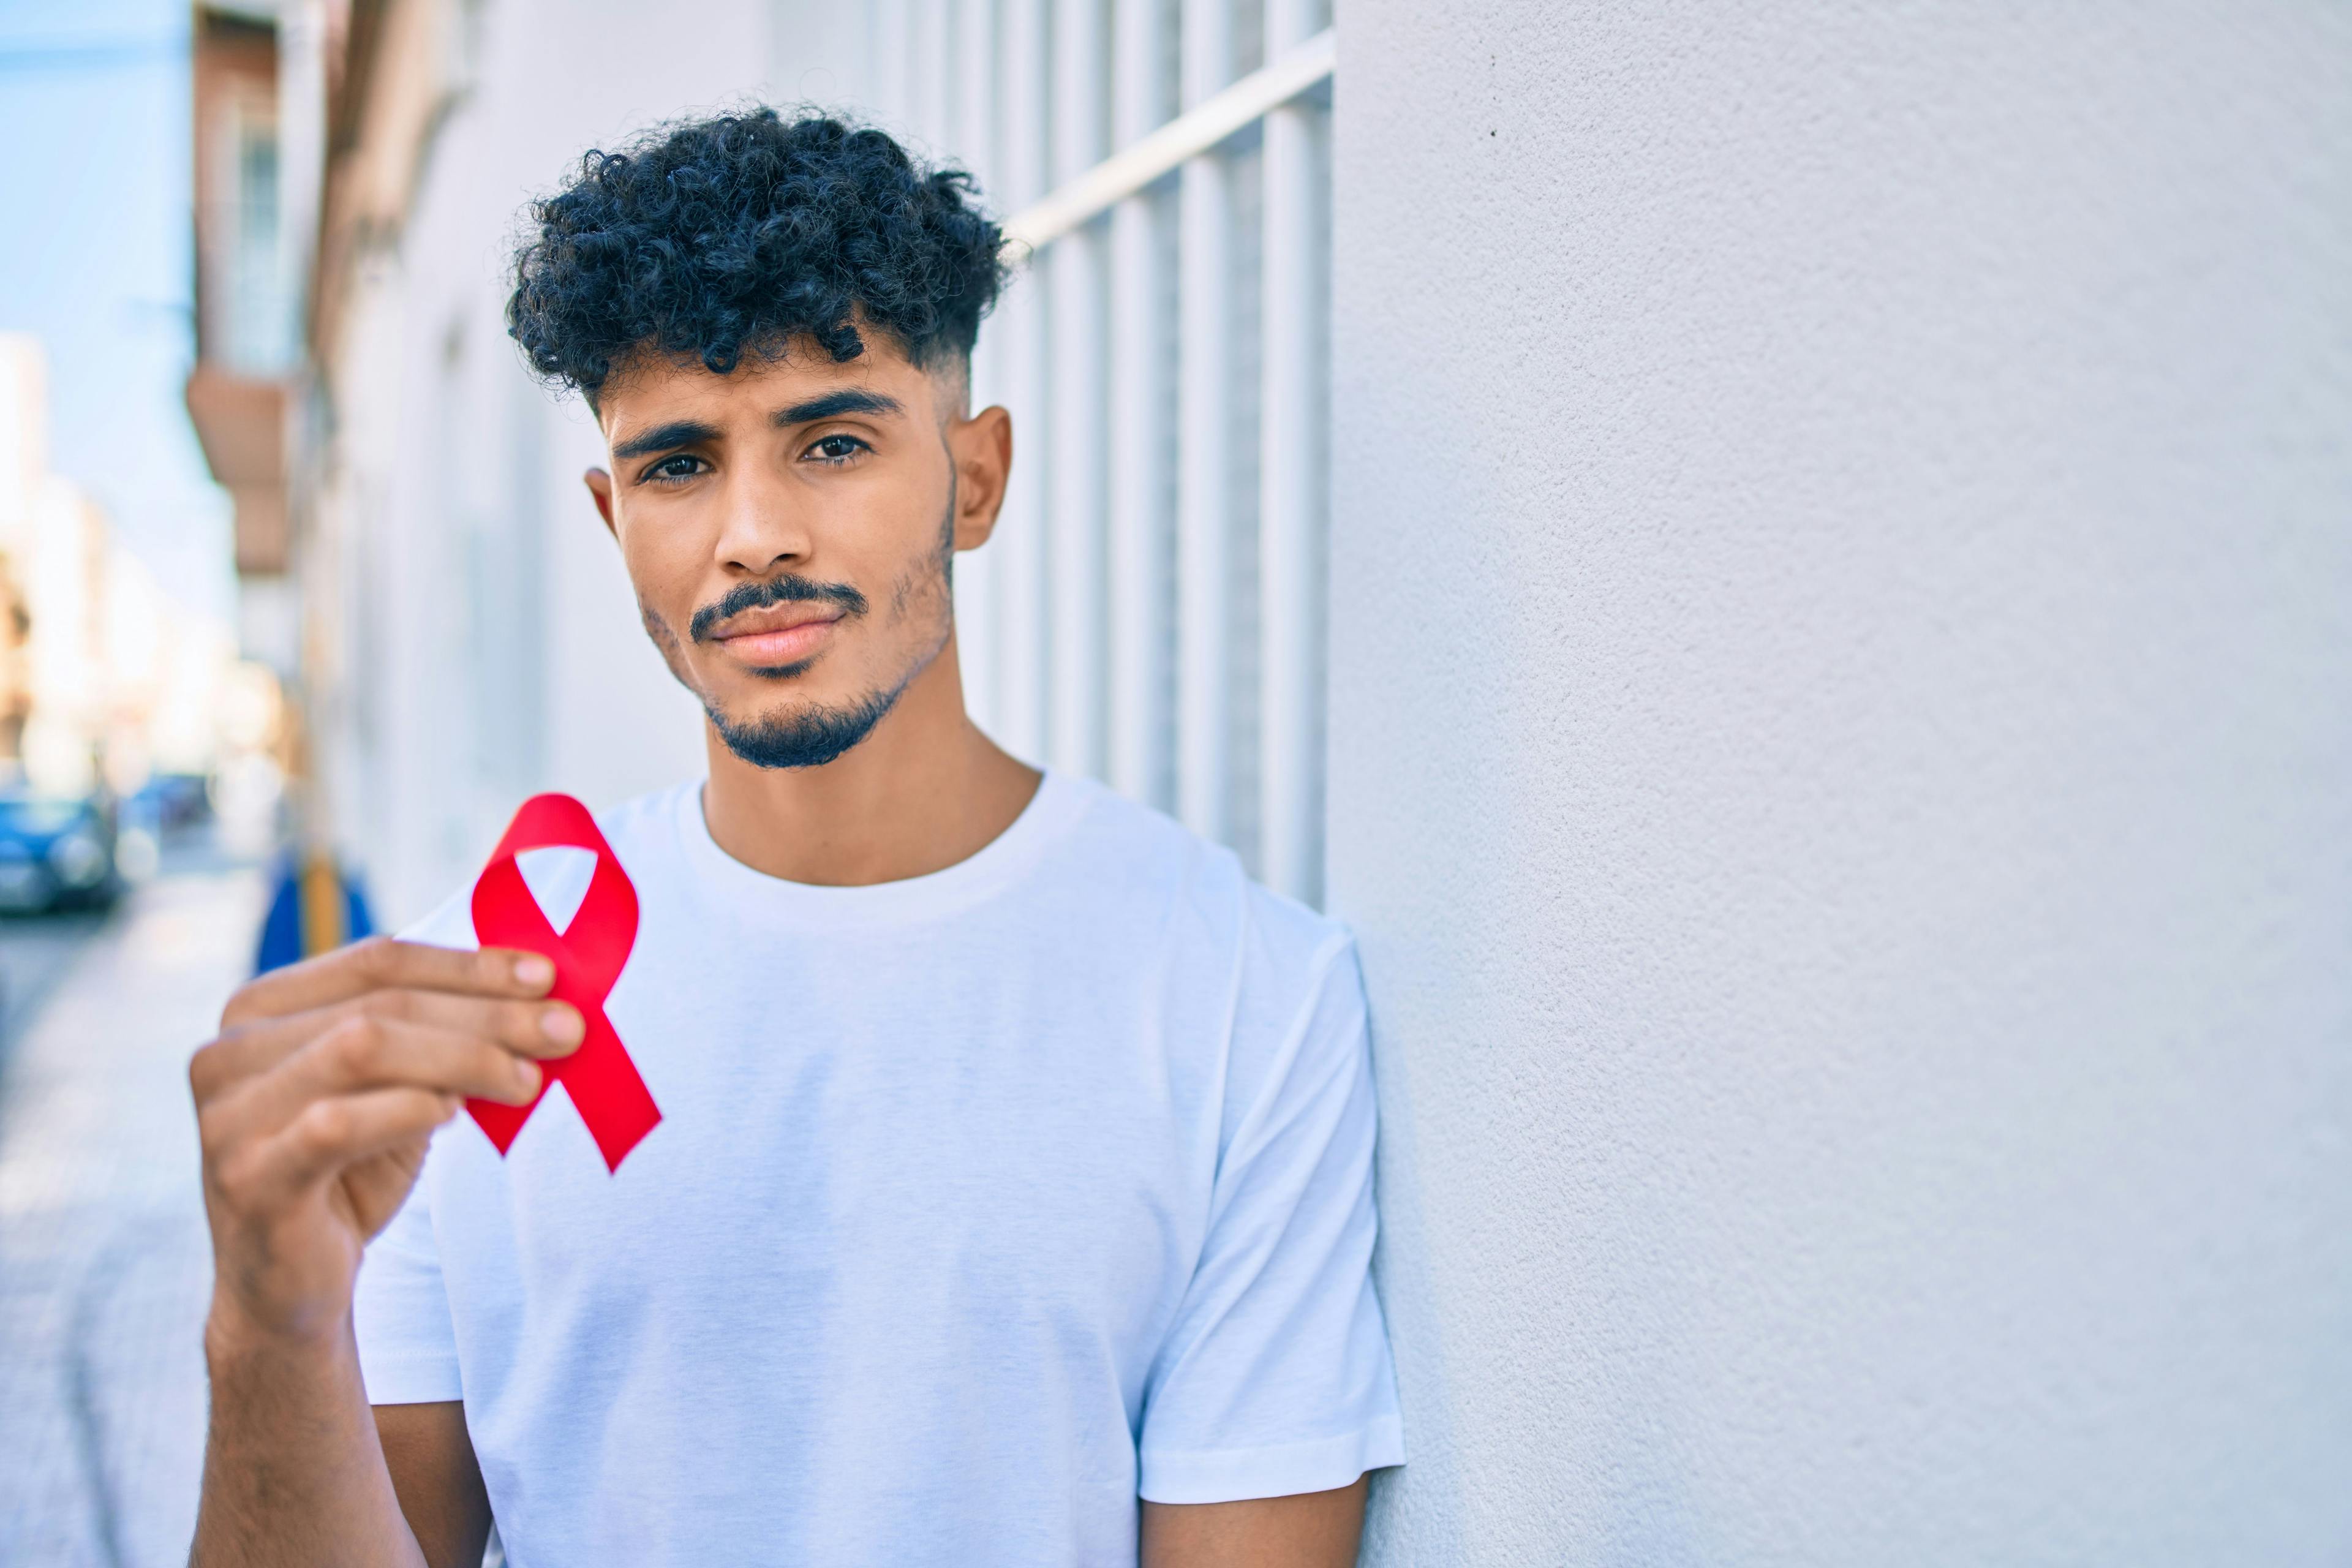 Young man with HIV ribbon | Image credit: Krakenimages.com - stock.adobe.com